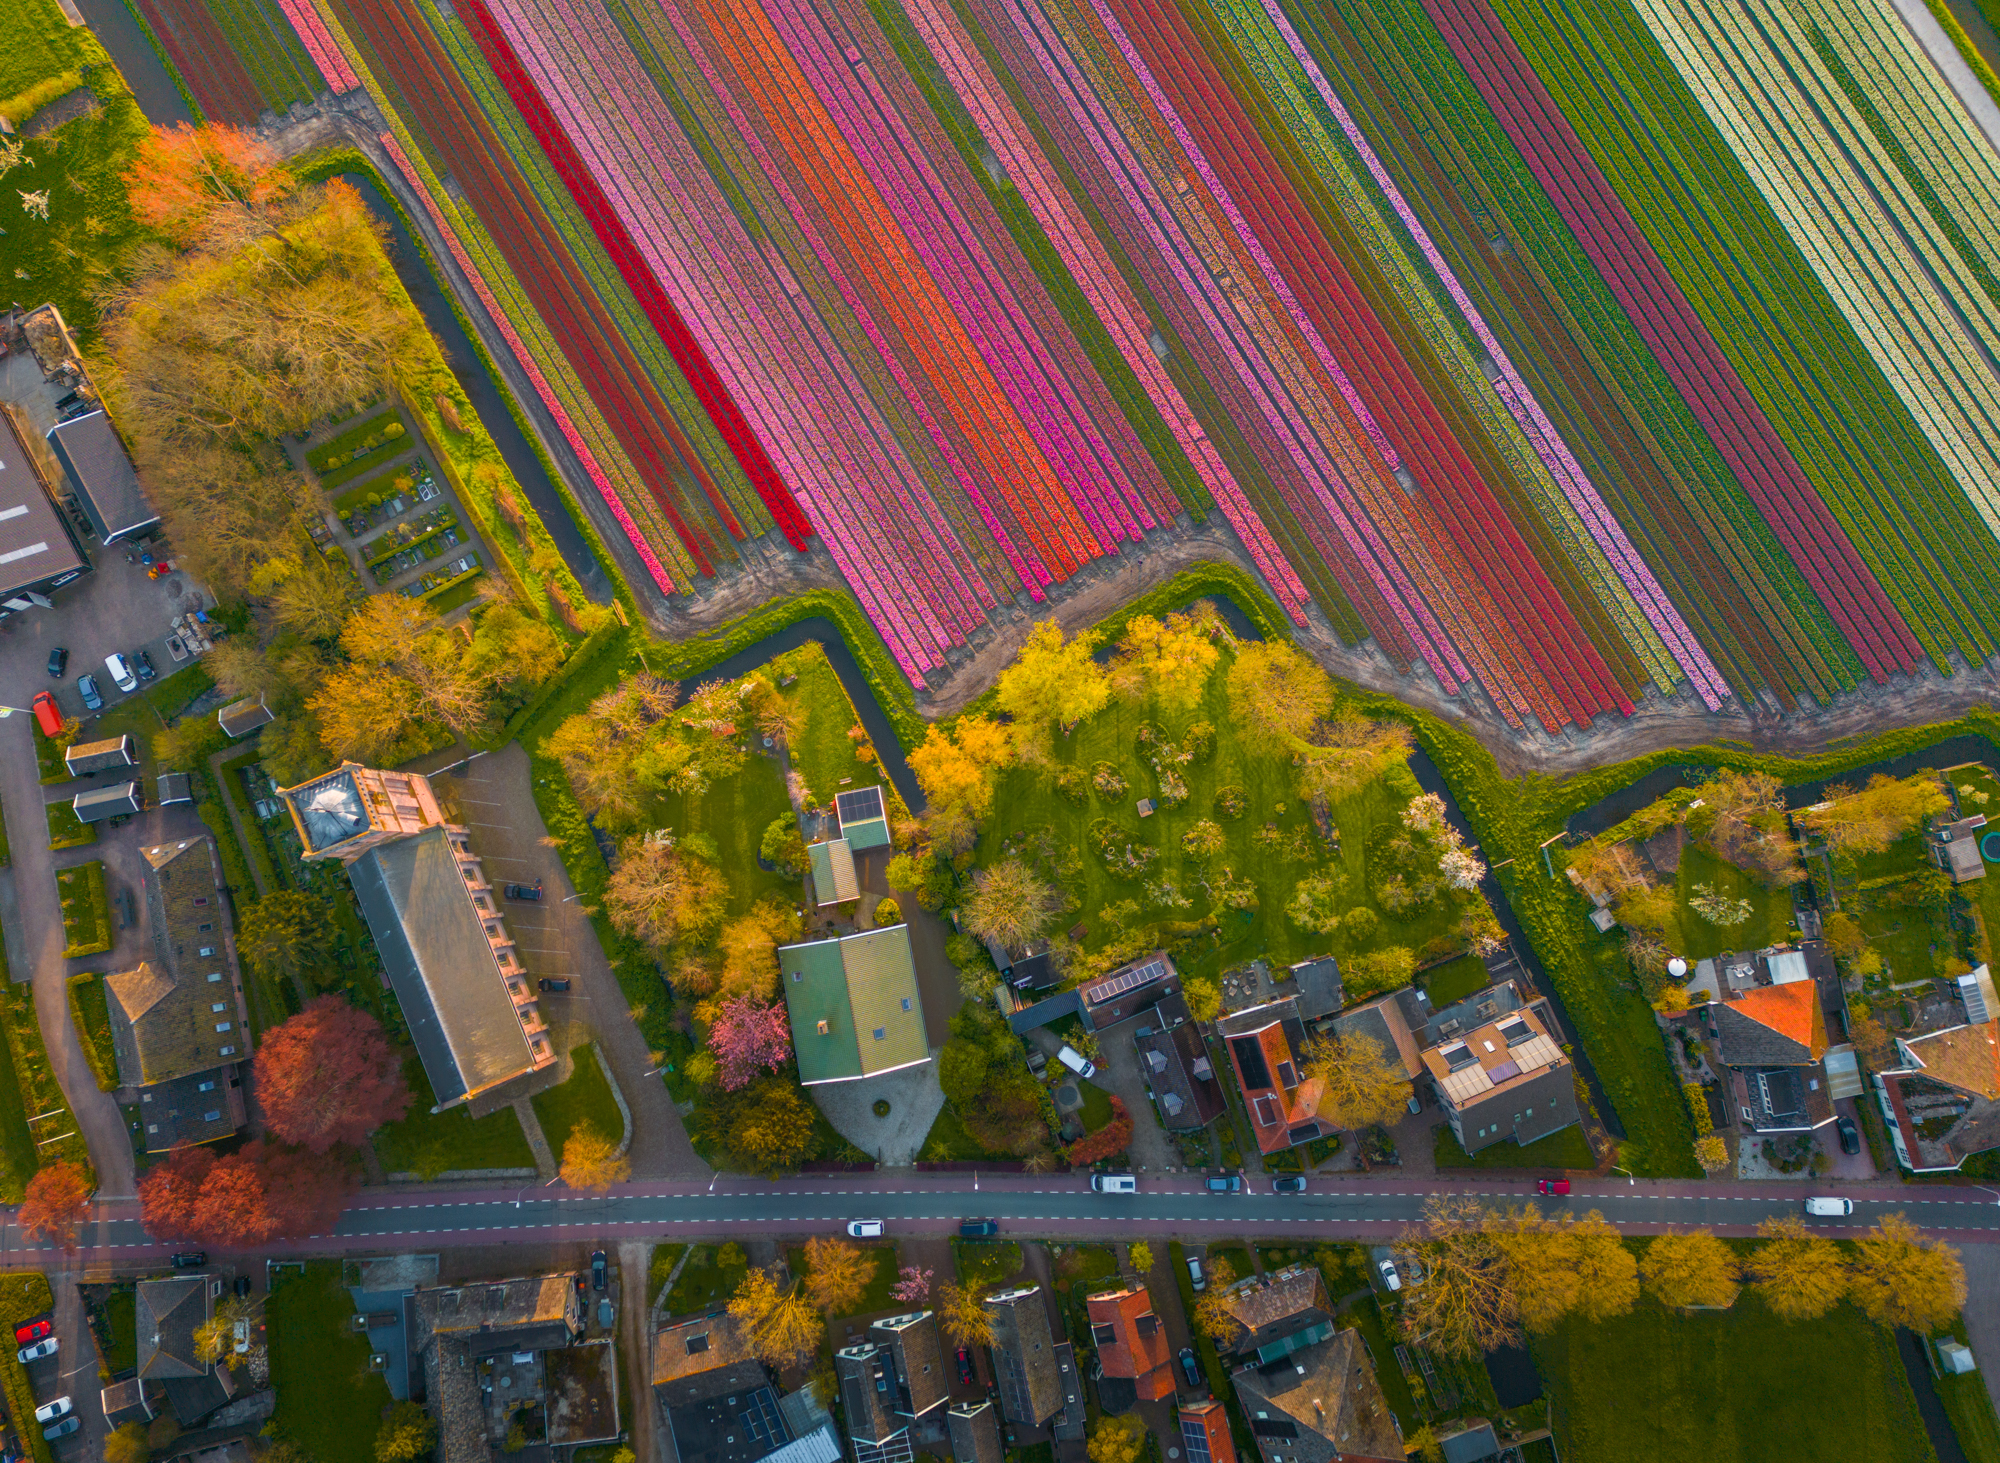 Living between the tulips. It must be beautiful to wake up and have a view right over the tulip fields.